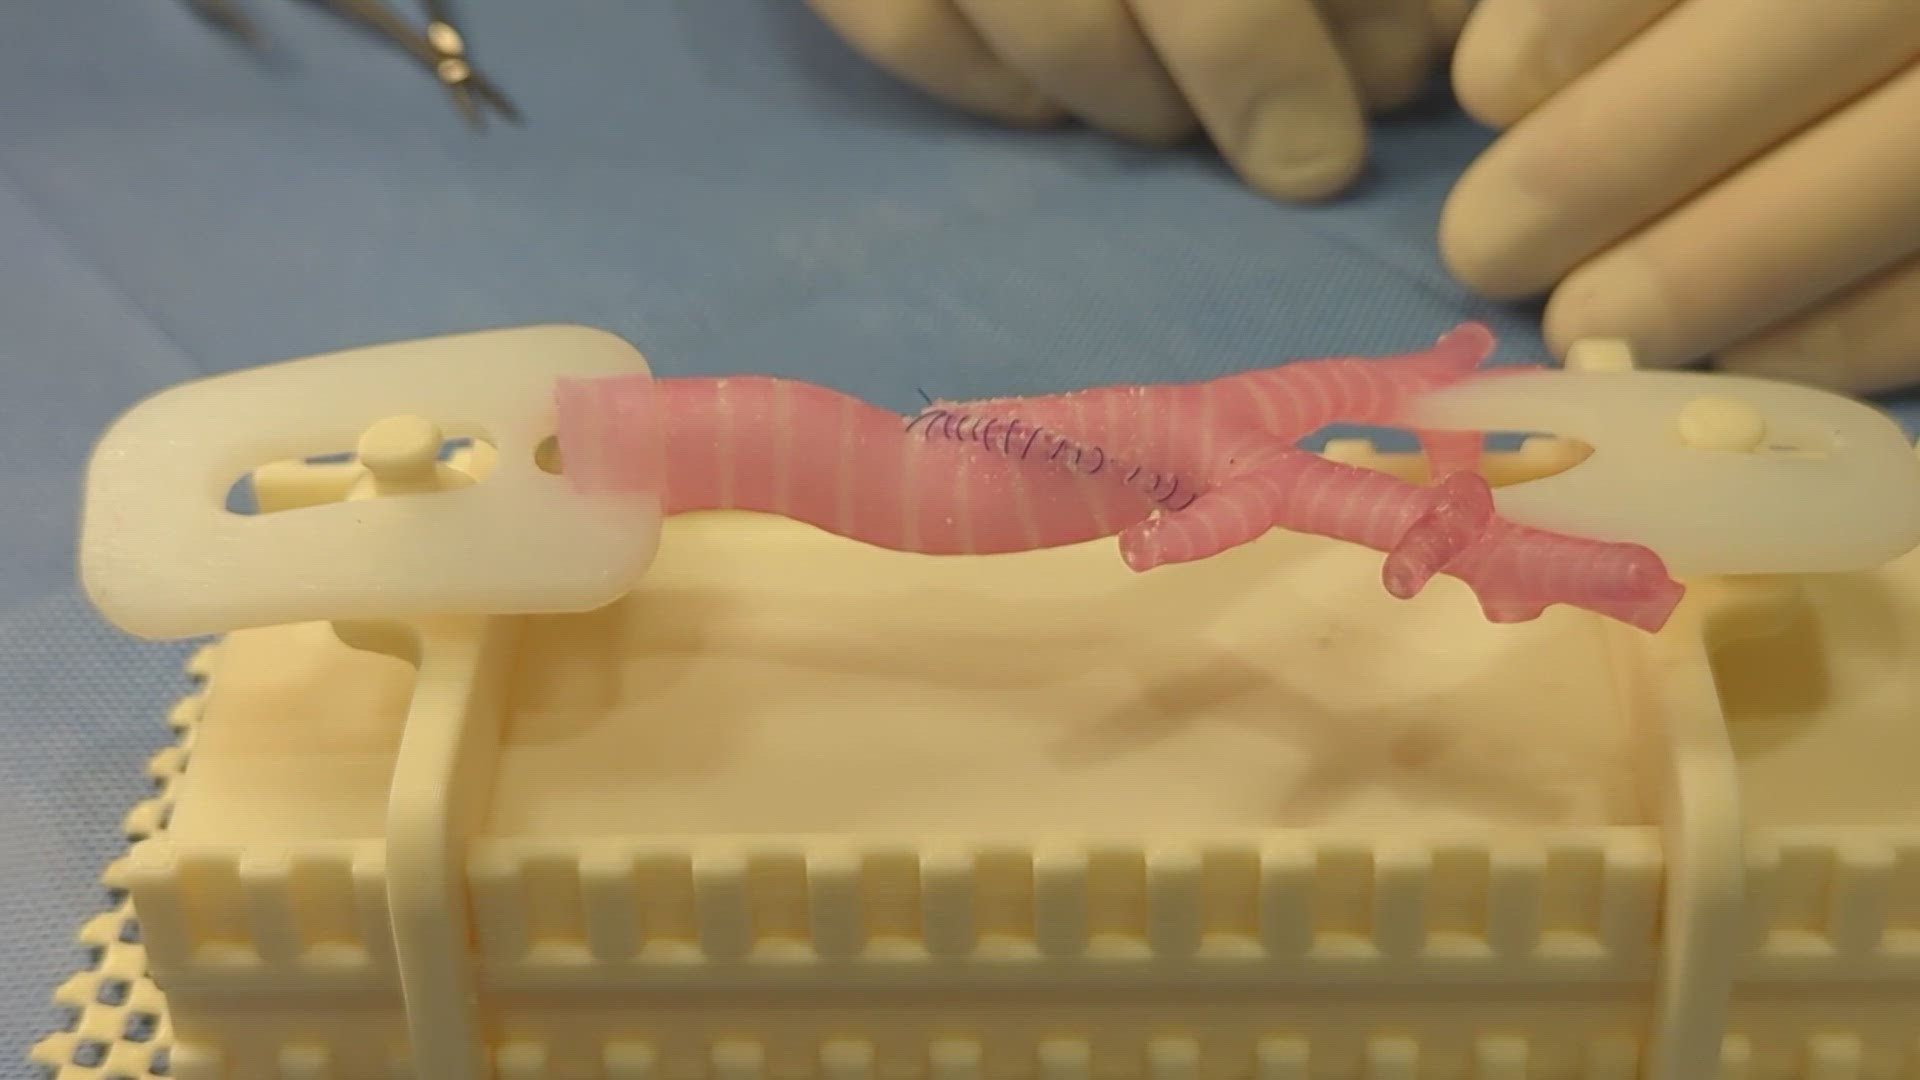 Seattle Children's Innovation Lab prints 3D models of children's trachea to use for surgery training